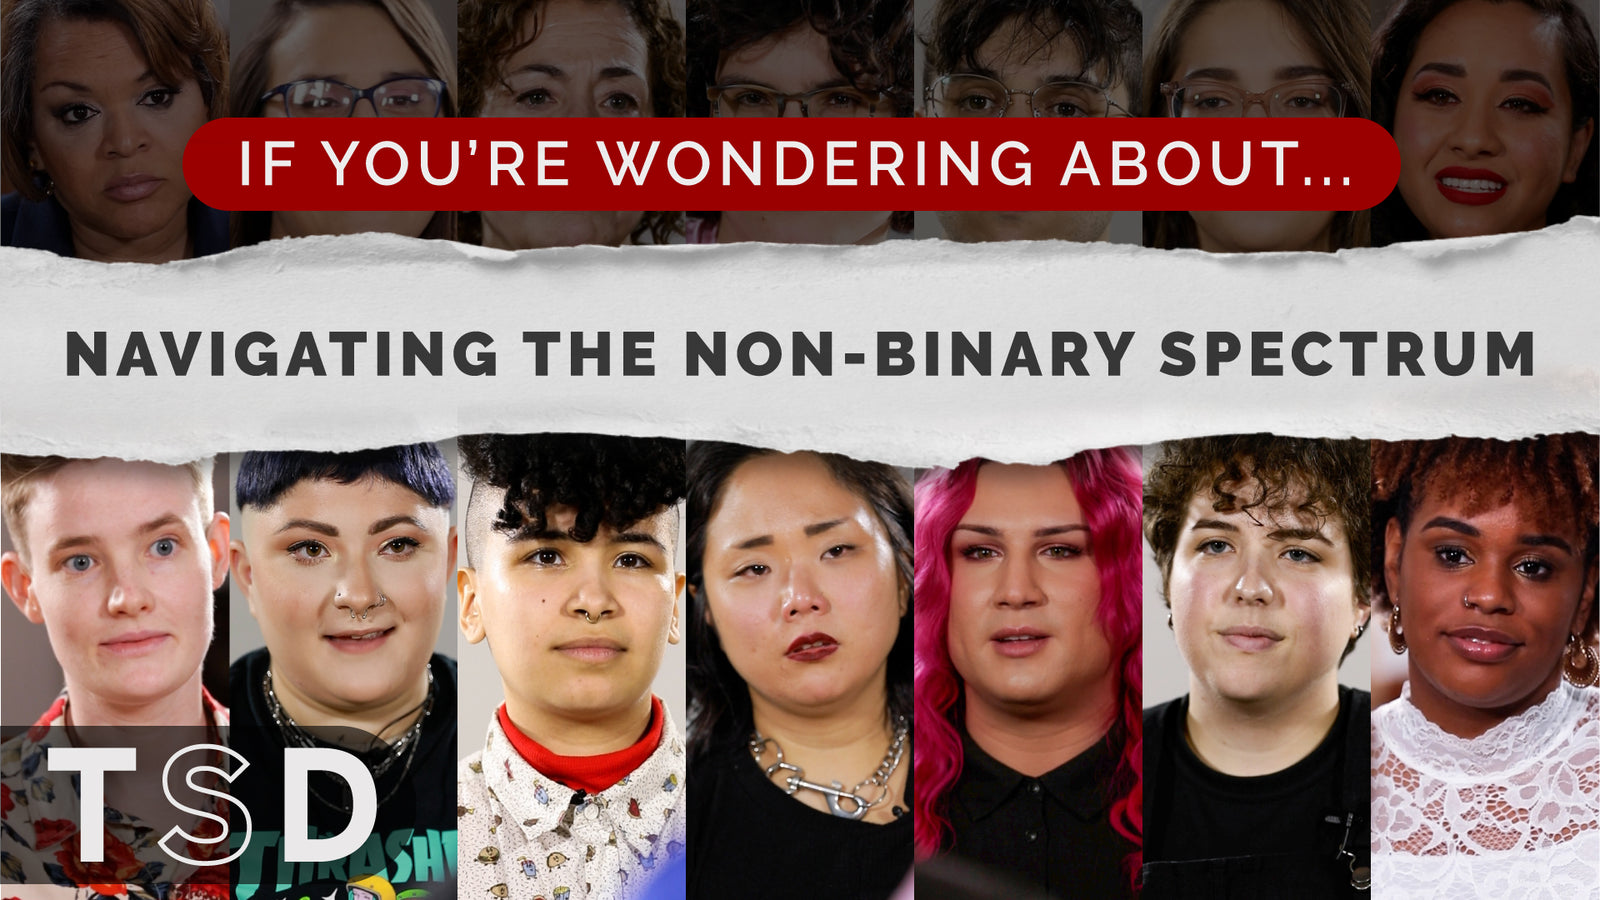 [VIDEO] If You're Wondering About: Navigating The Non-Binary Spectrum